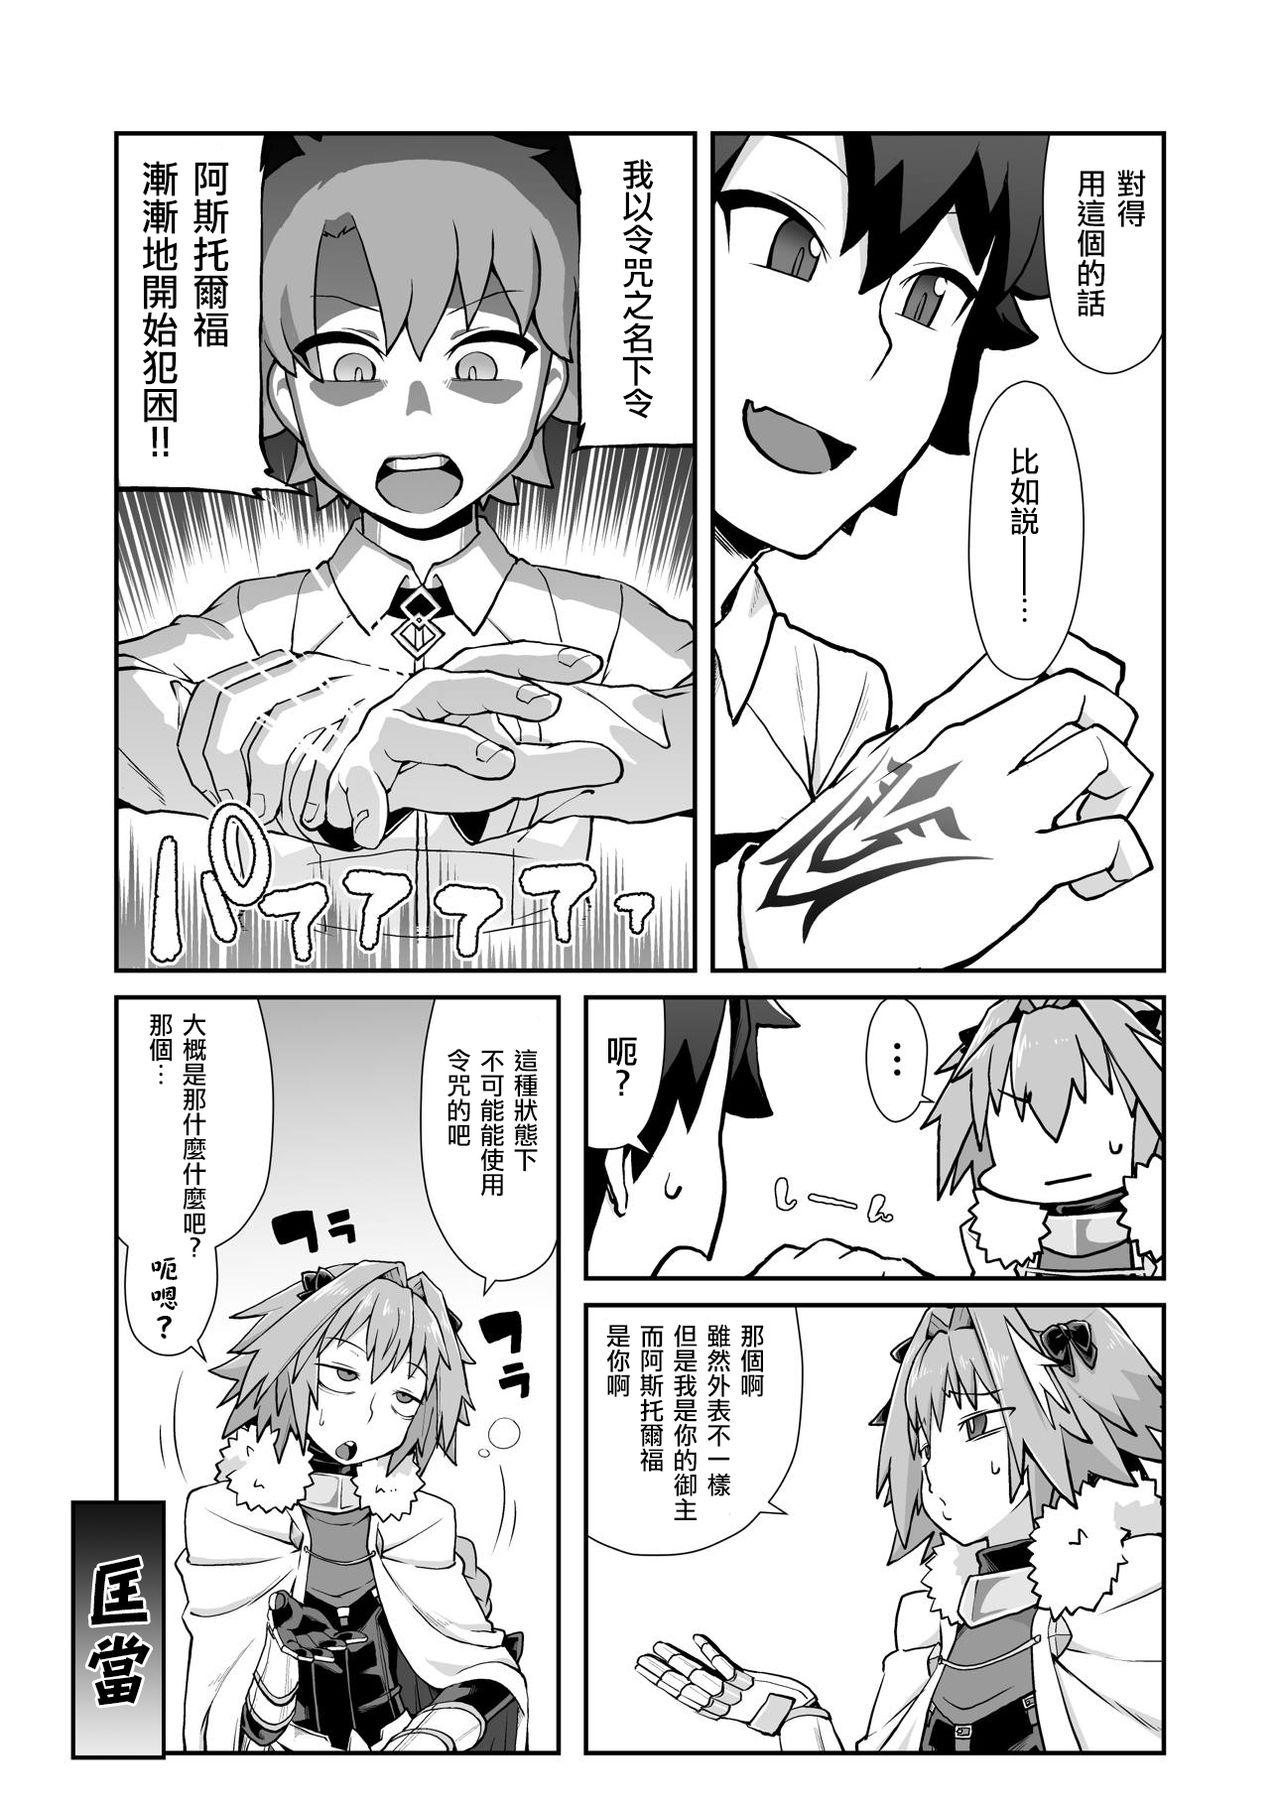 Wife Master Change - Fate grand order Moneytalks - Page 6